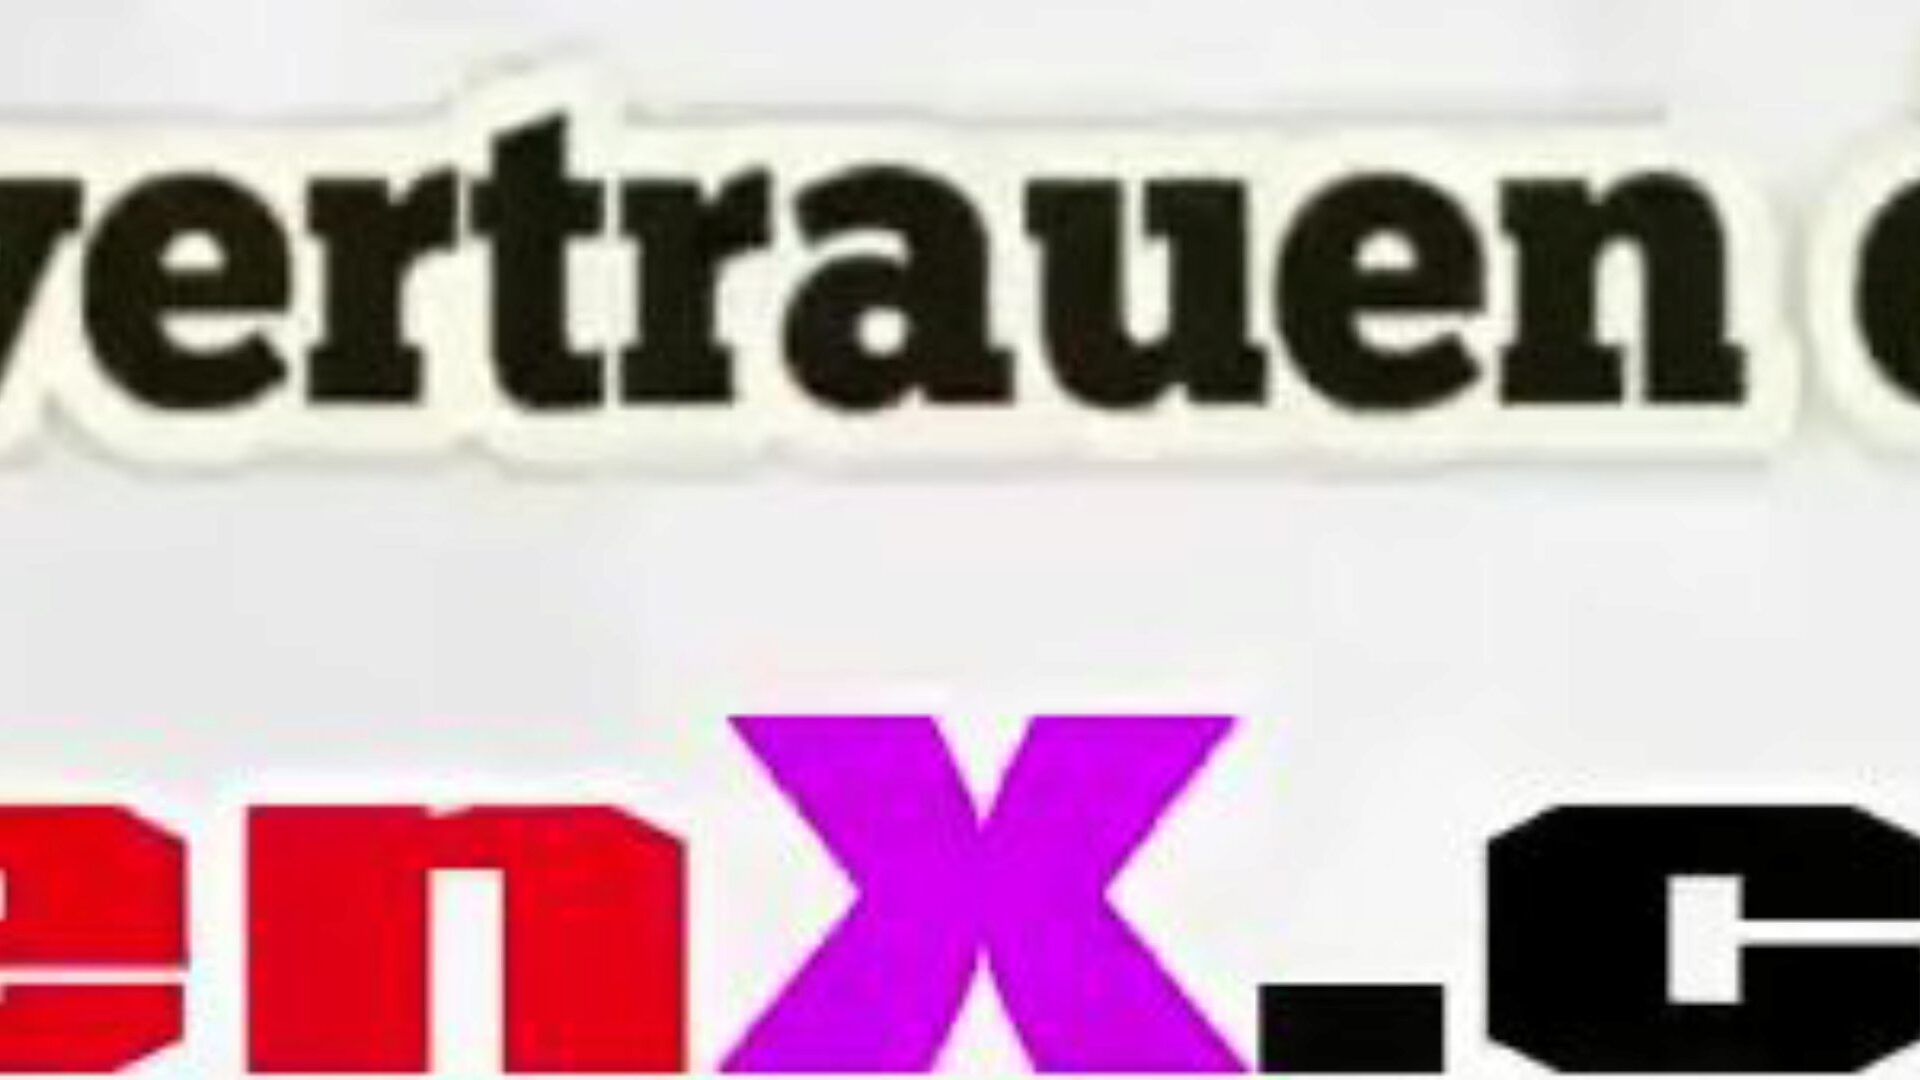 sie erpresste ihn ihre muschi zu ficken、porn 0a：xhamster watch sie erpresste ihn ihre muschi zu ficken Episode on xhamster、the most great hd bang-out tube web page with tos of free German deutsch＆german mother I'd want to fuck pornography映画のシーン